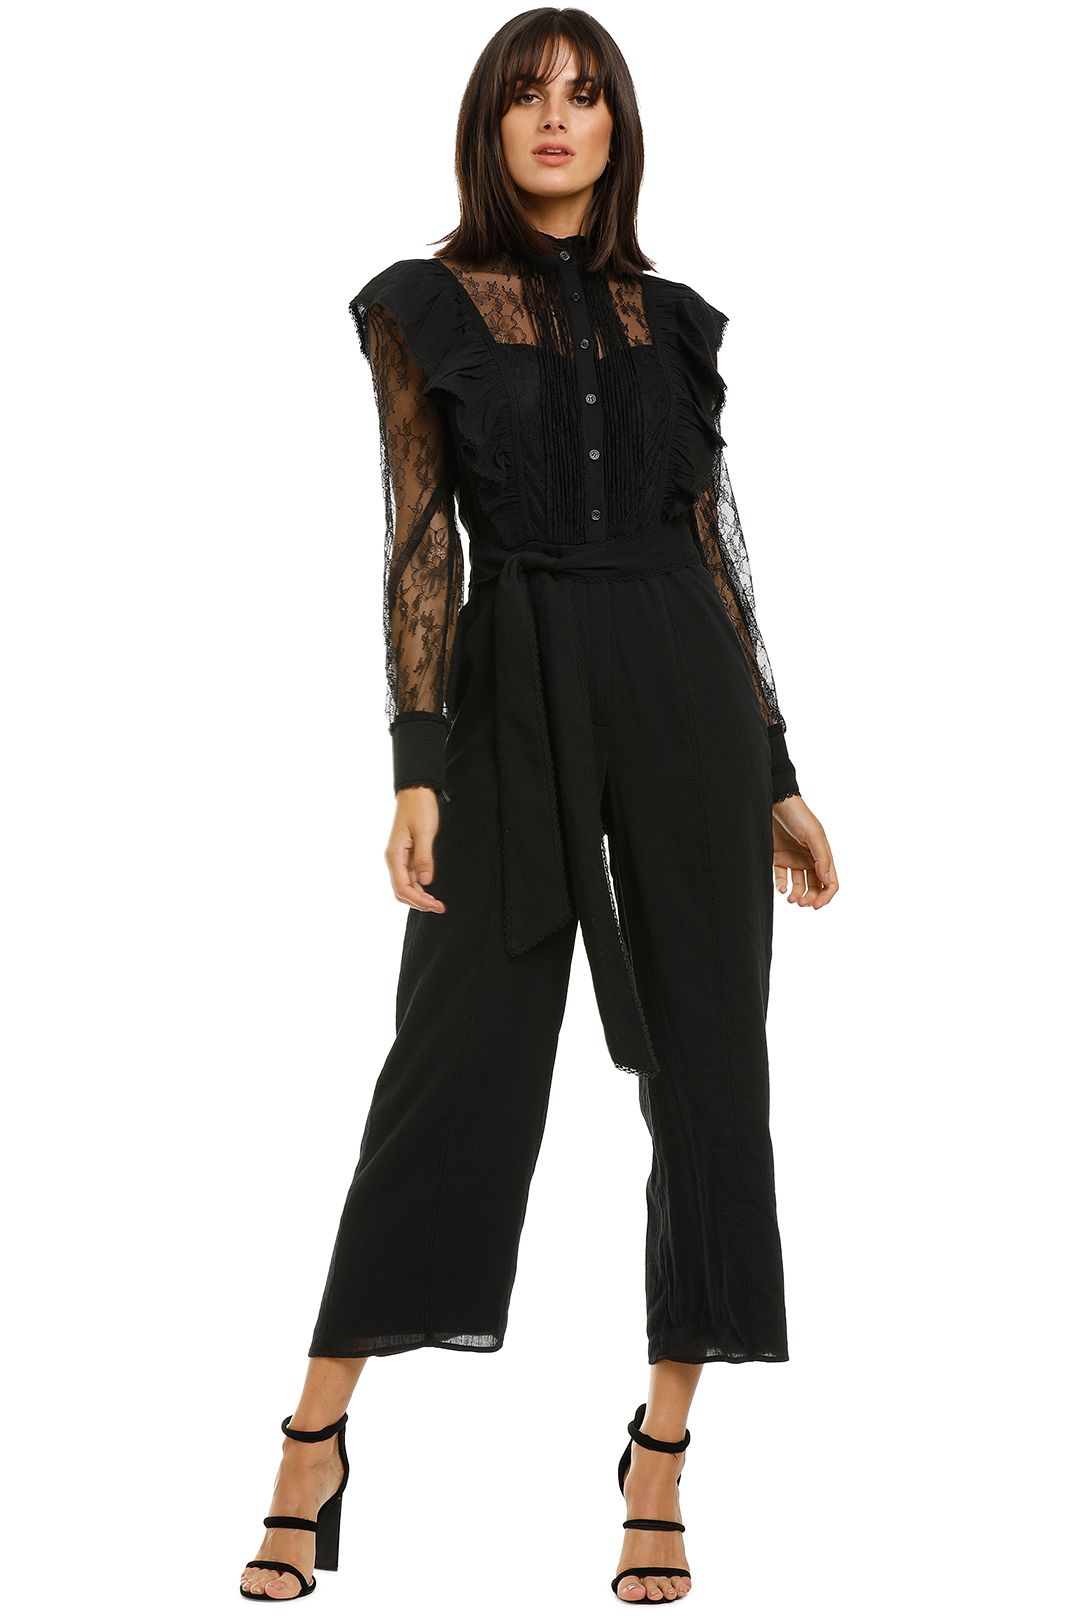 Mixed Lace Frill Jumpsuit by Whistles for Hire | GlamCorner